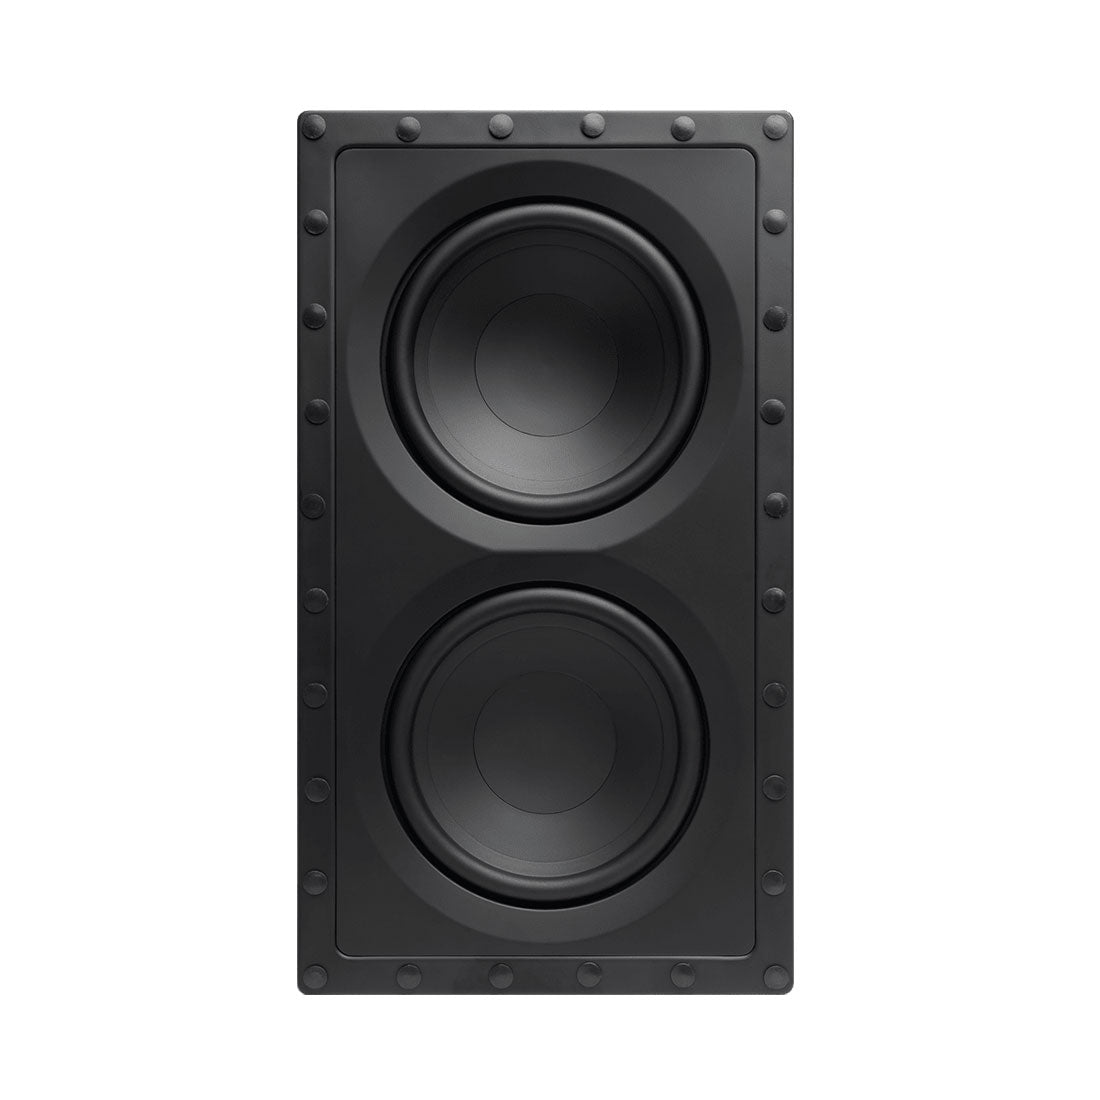 Paradigm DCS-208FR3 Defiance Fire-Rated In-Wall Custom Subwoofer